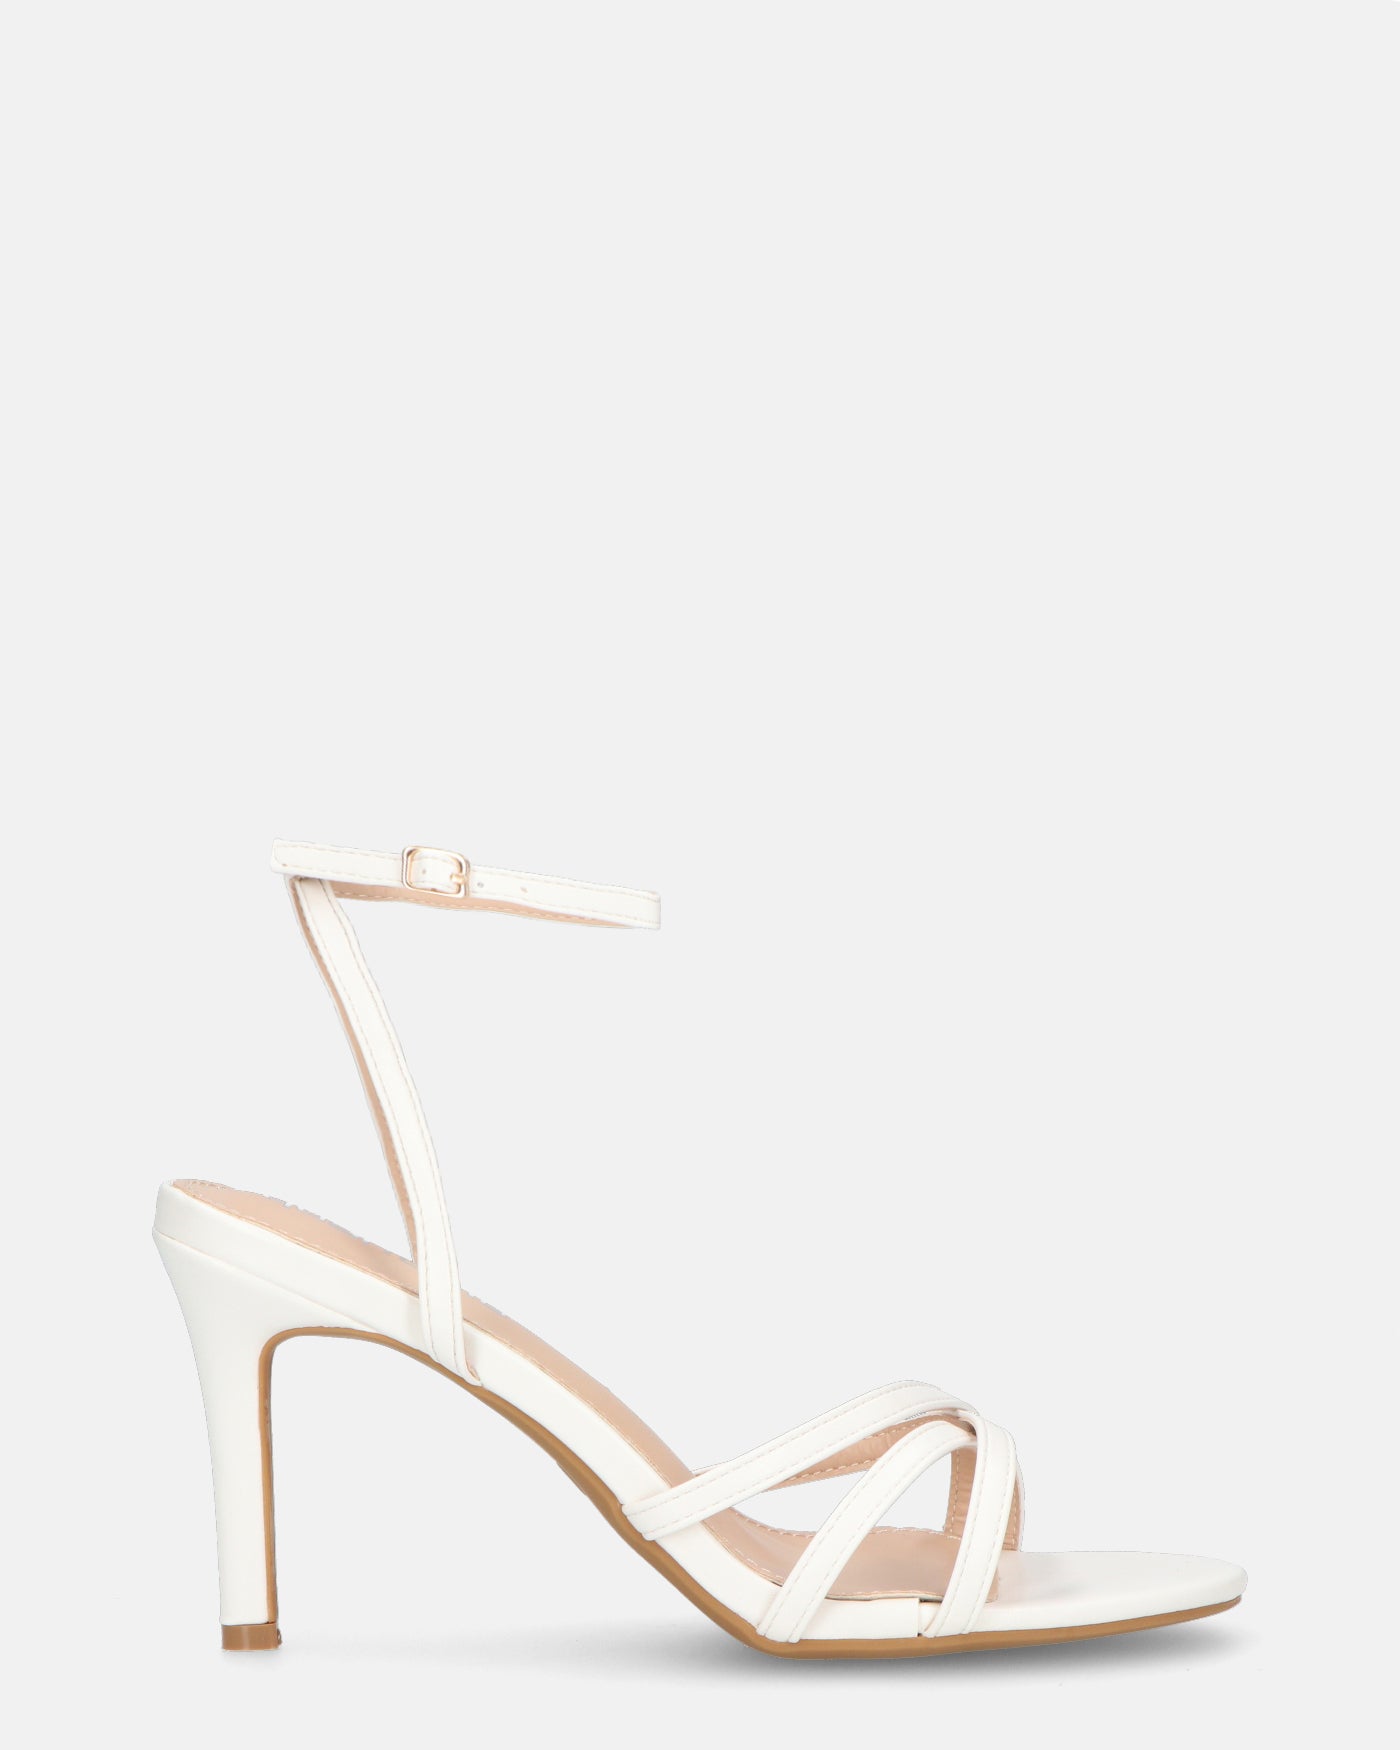 PHENYO - white high heels with strap and beige sole